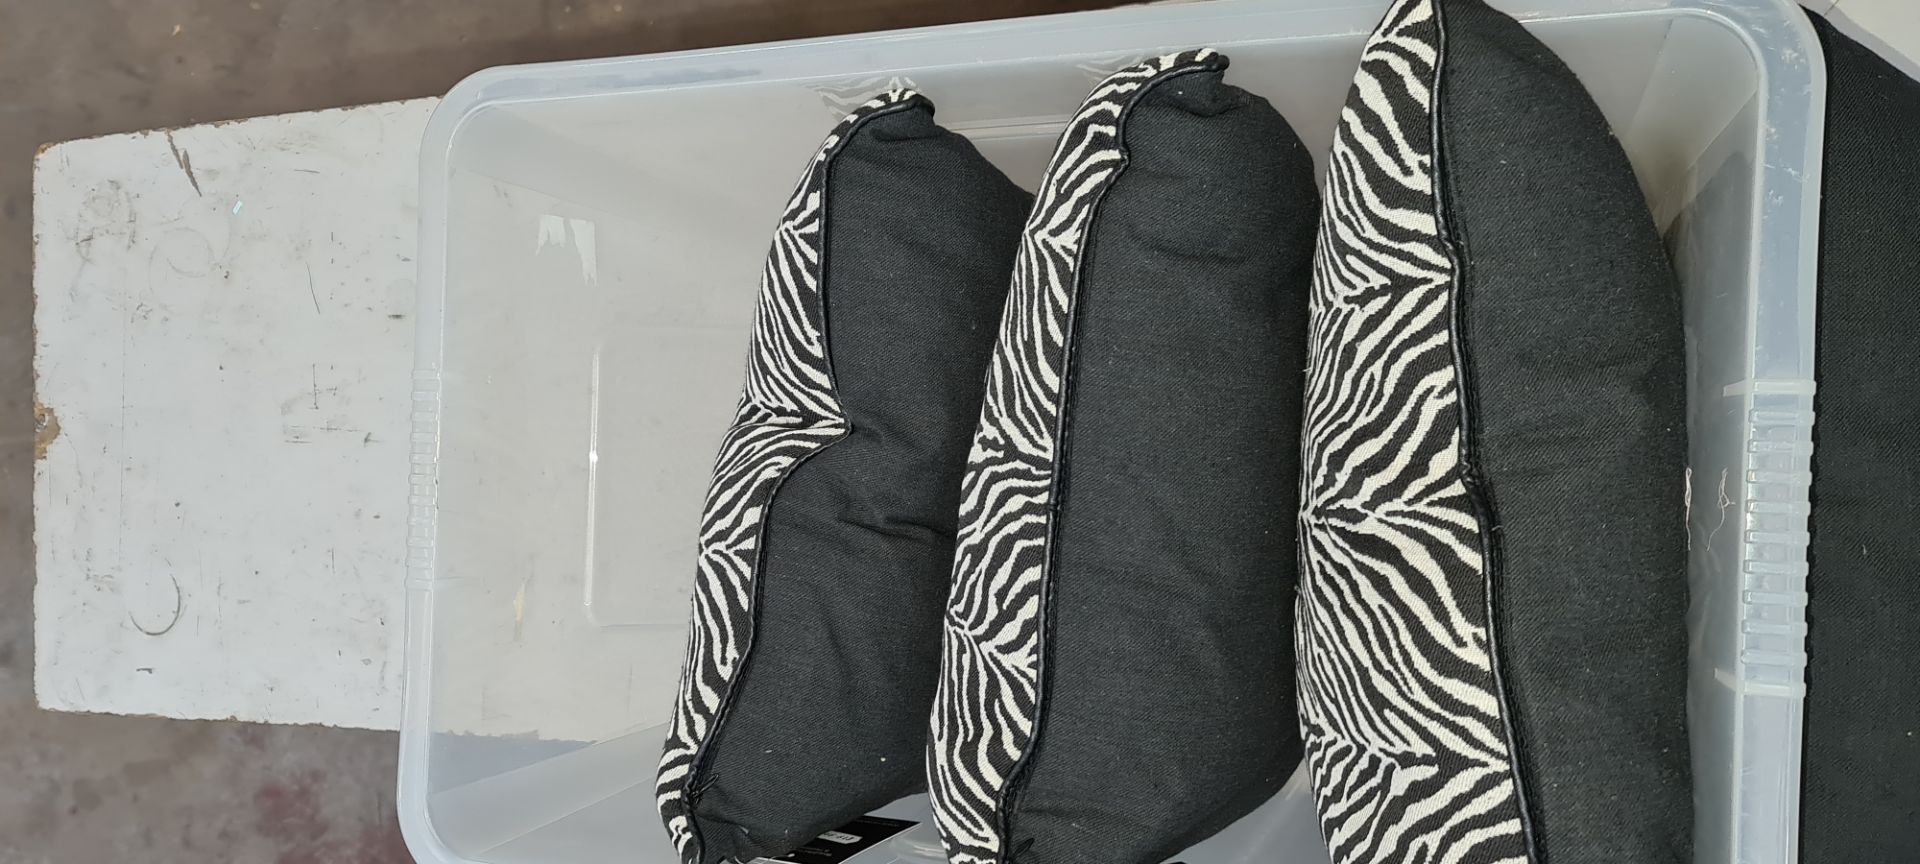 Set of 4 square cushions with black & white striped pattern, priced at £19.99 each - crate excluded - Image 4 of 4